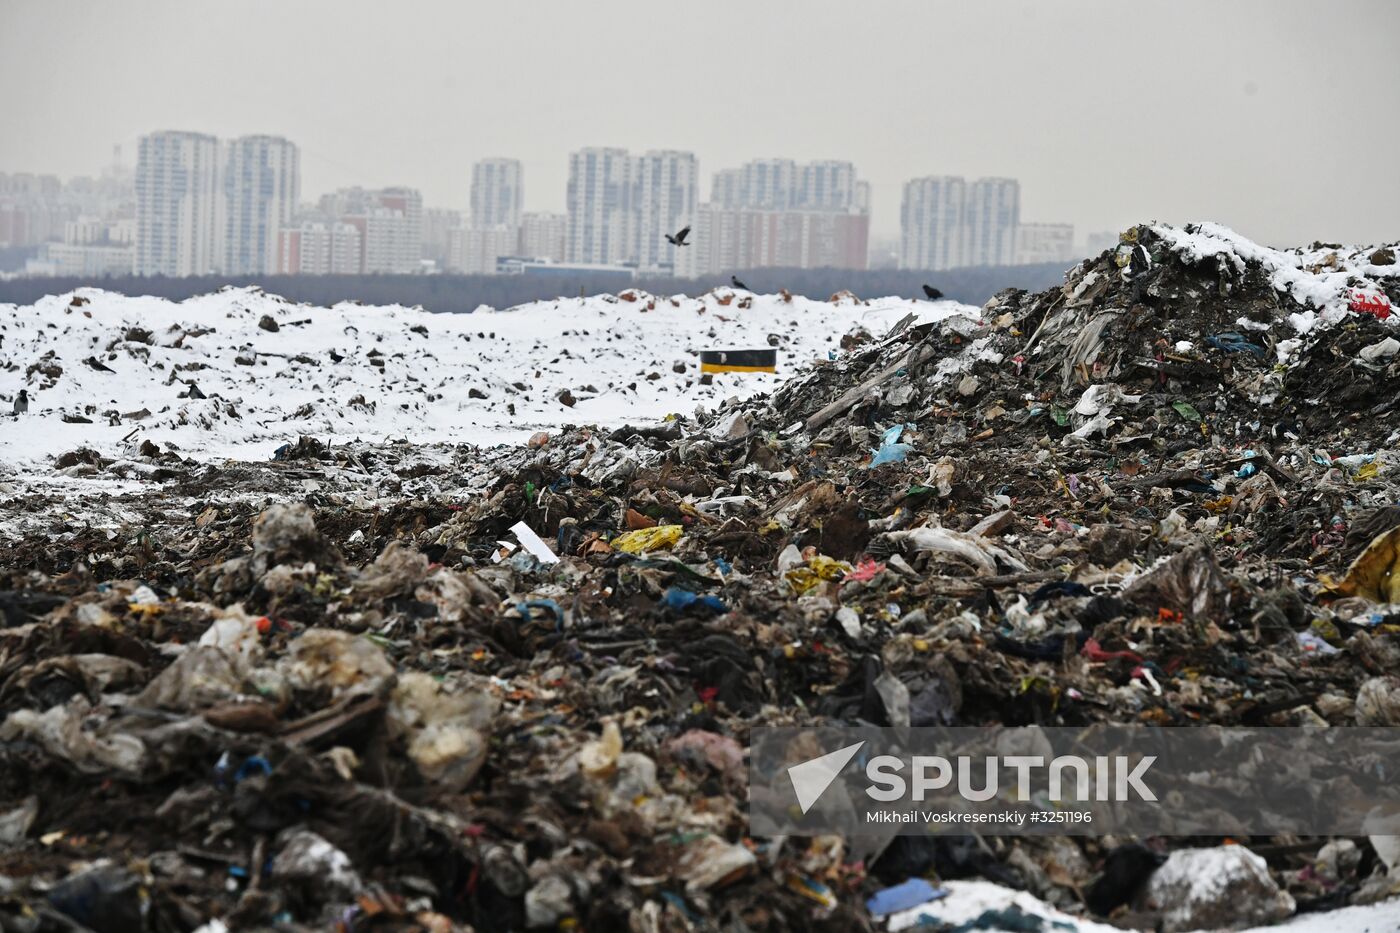 Kuchino landfill site to include flare facility for waste recycling